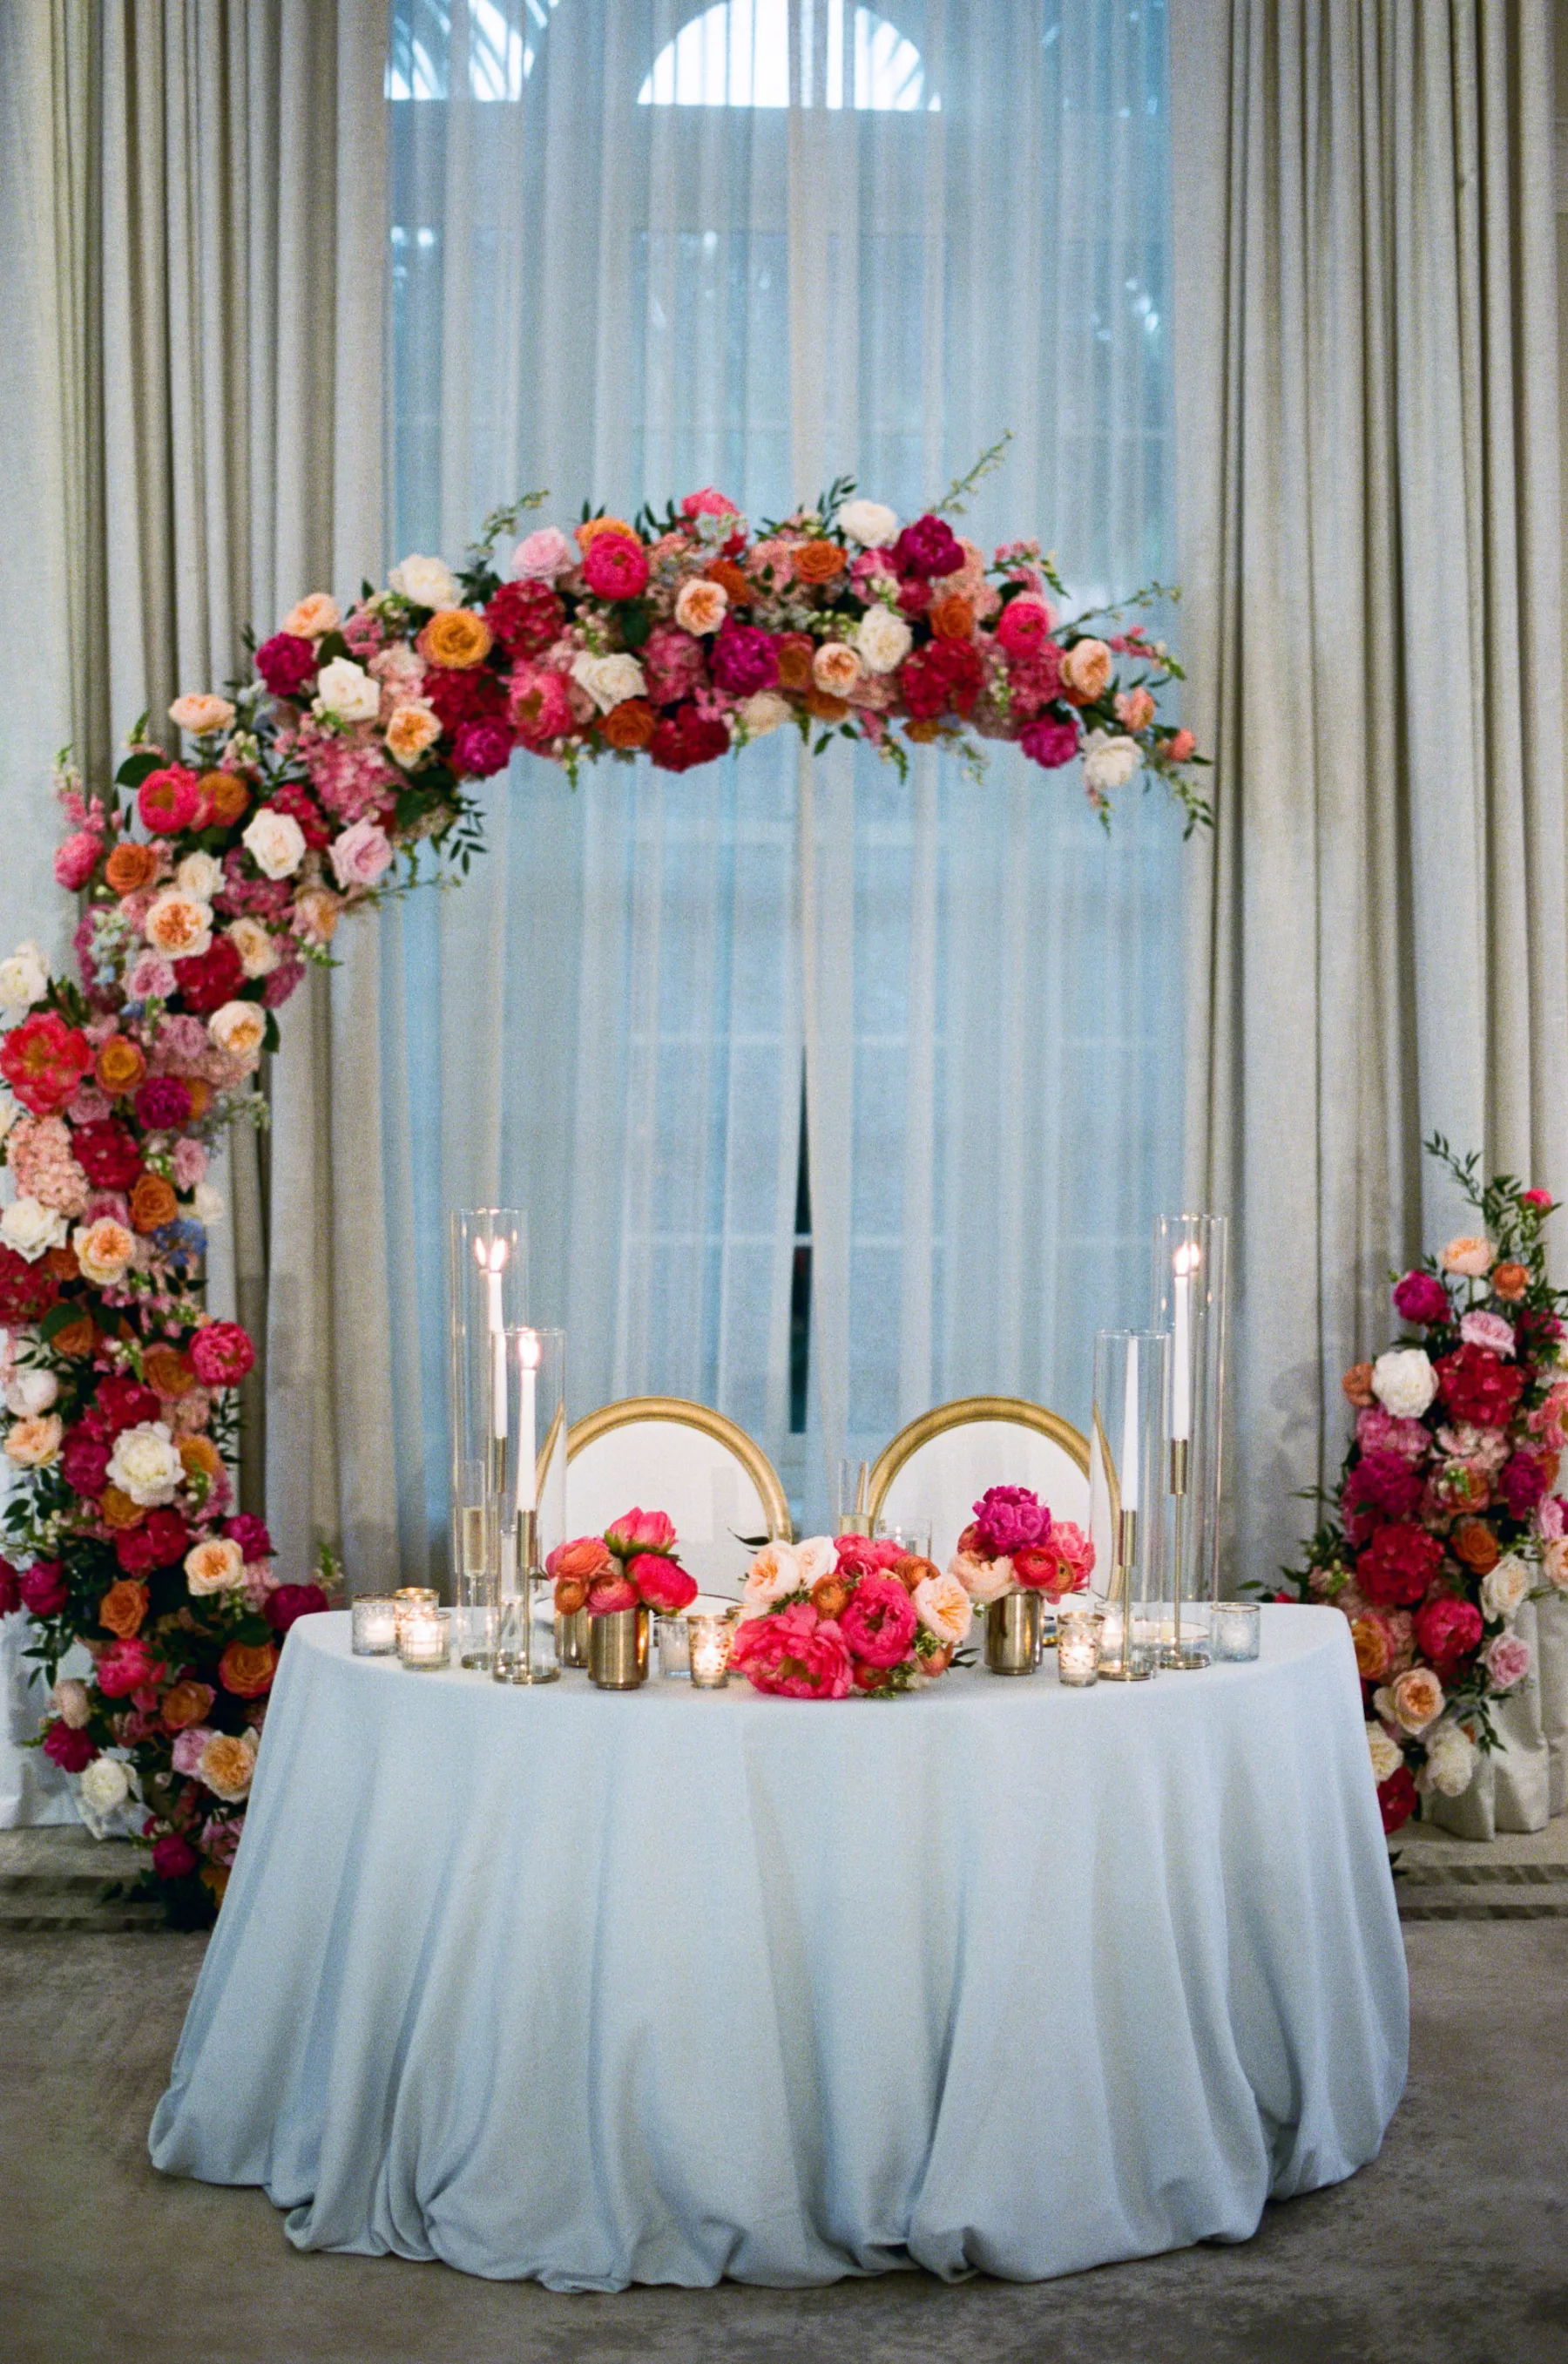 Luxurious Pink and Blue Summer Ballroom Wedding Reception Sweetheart Table Decor Ideas | Round Backdrop with Pink Hydrangeas and Orange Garden Roses | Tampa Bay Florist Bruce Wayne Florals | Event Planner Parties A La Carte | Kate Ryan Event Rentals